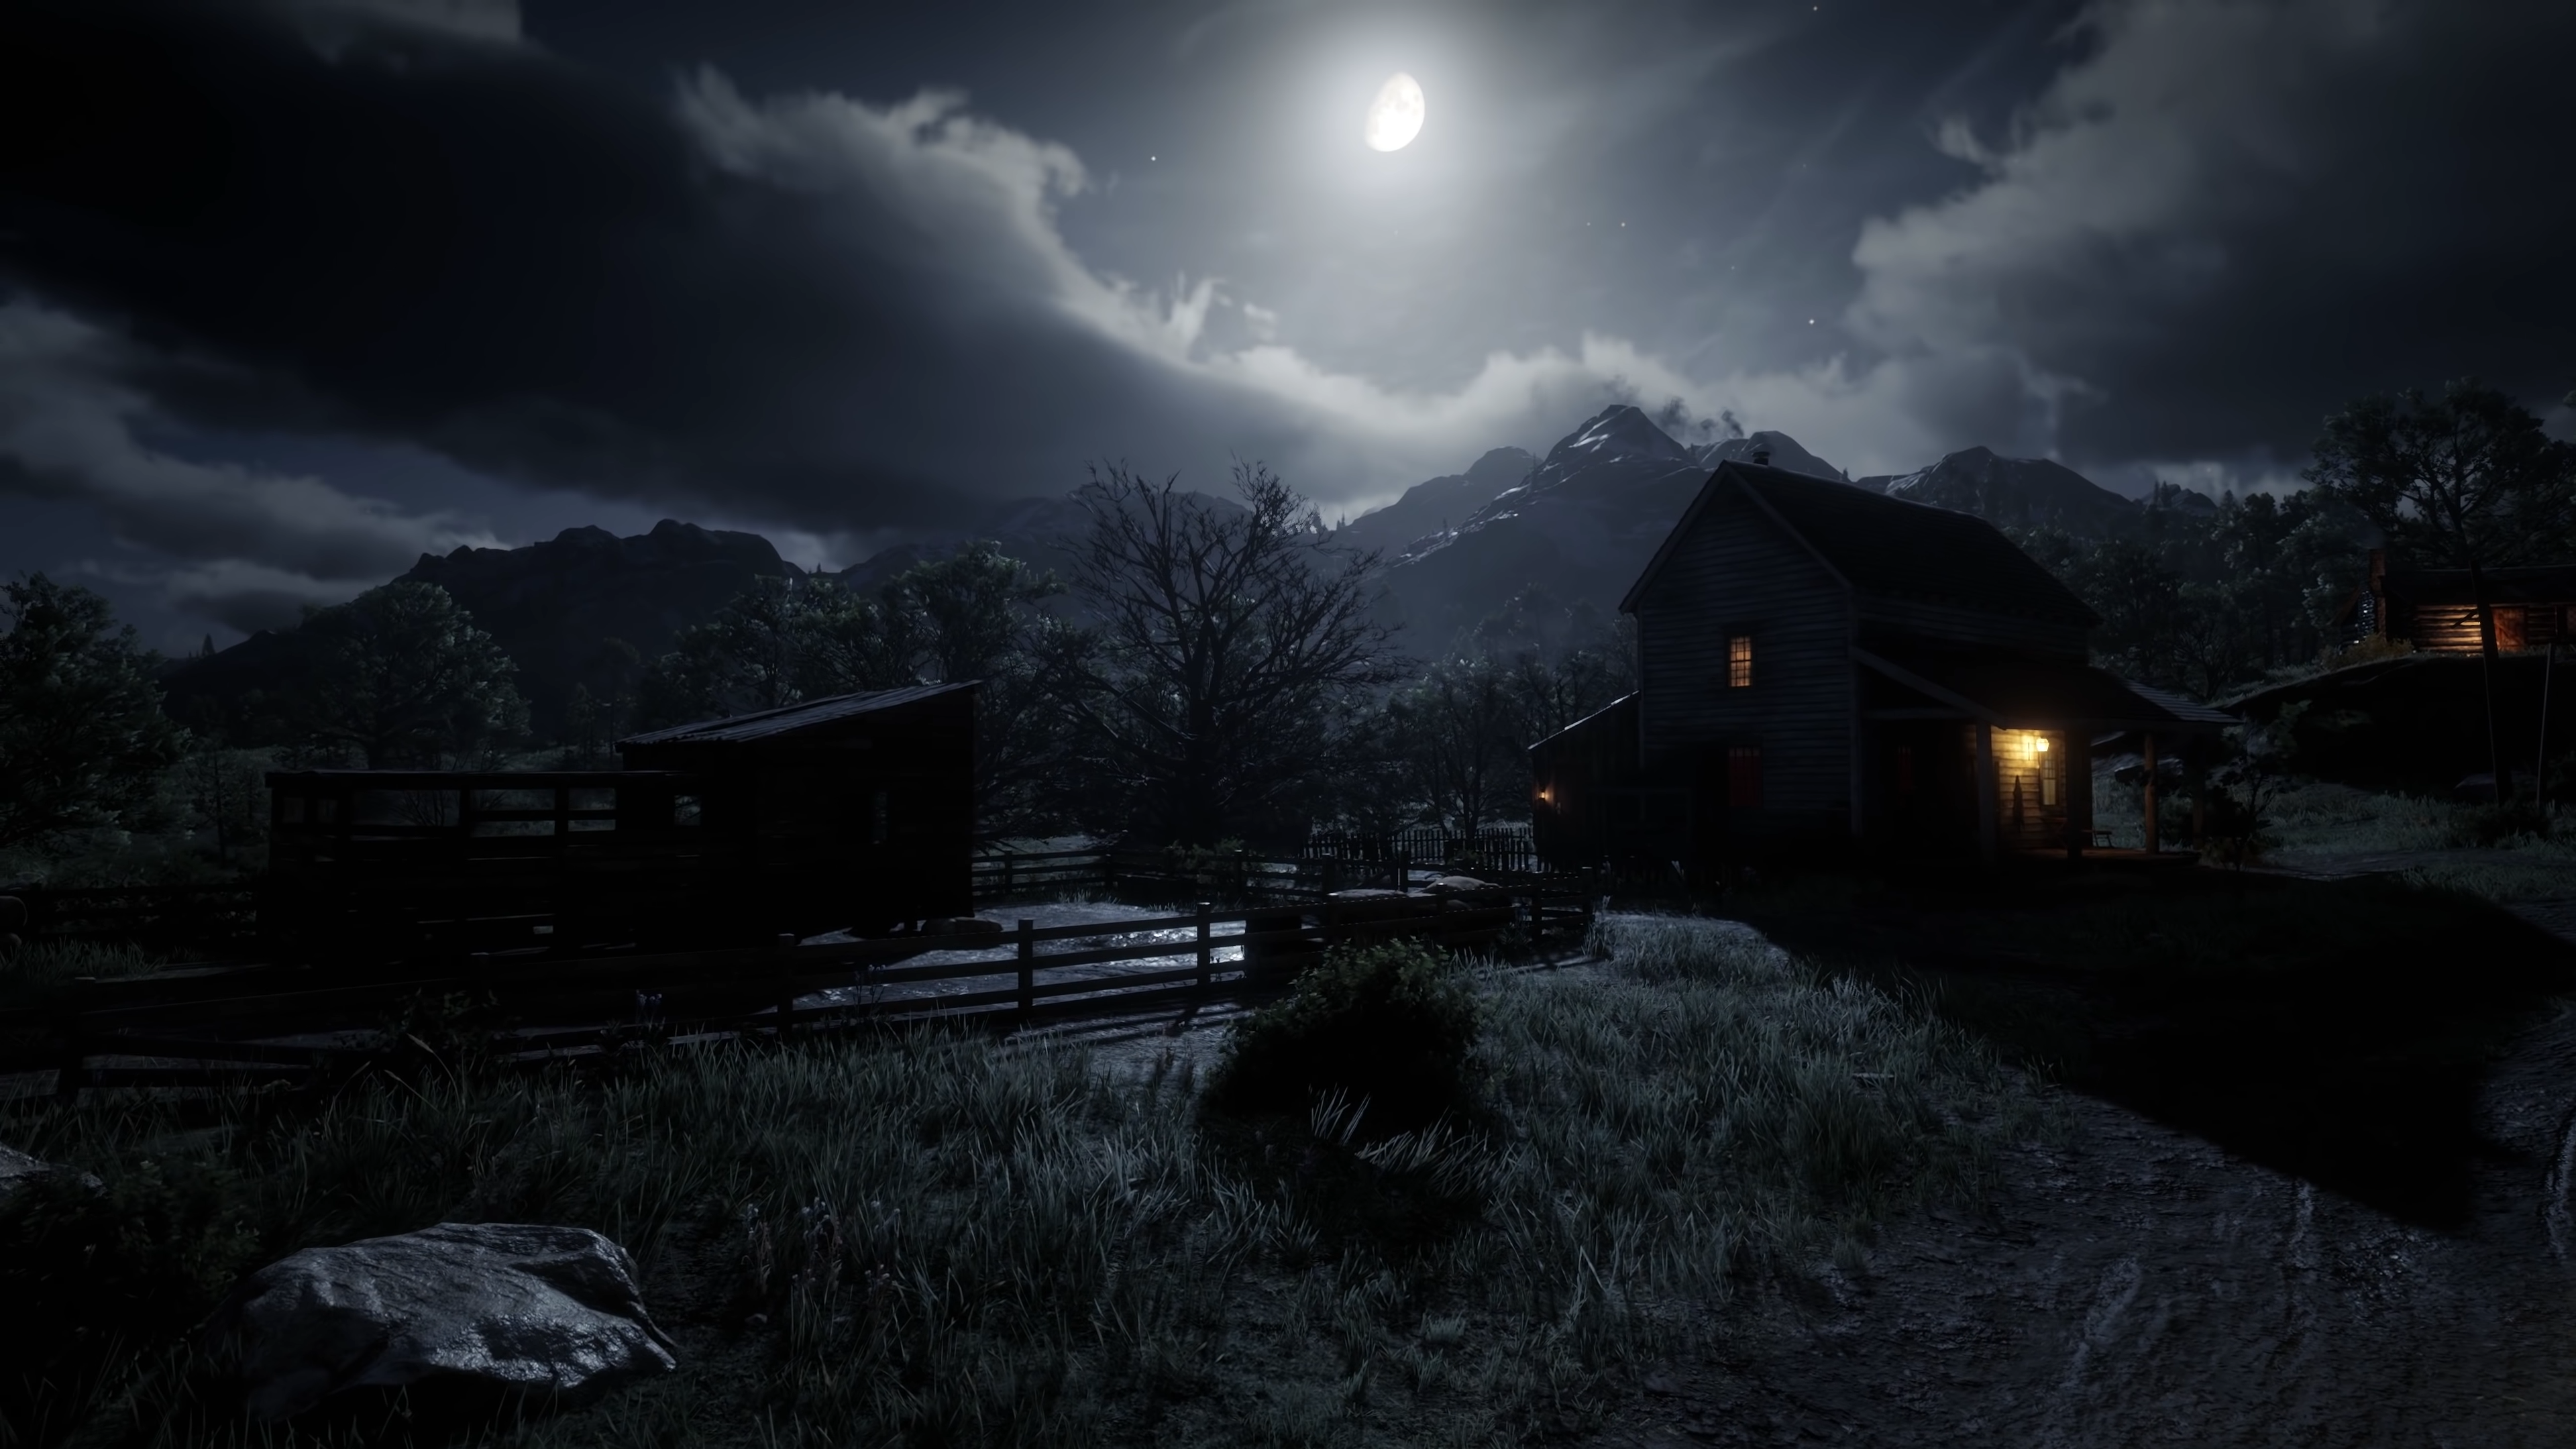 Stunning night scene with a bright moon from the video game Red Dead Redemption 2, perfect as an HD desktop wallpaper.